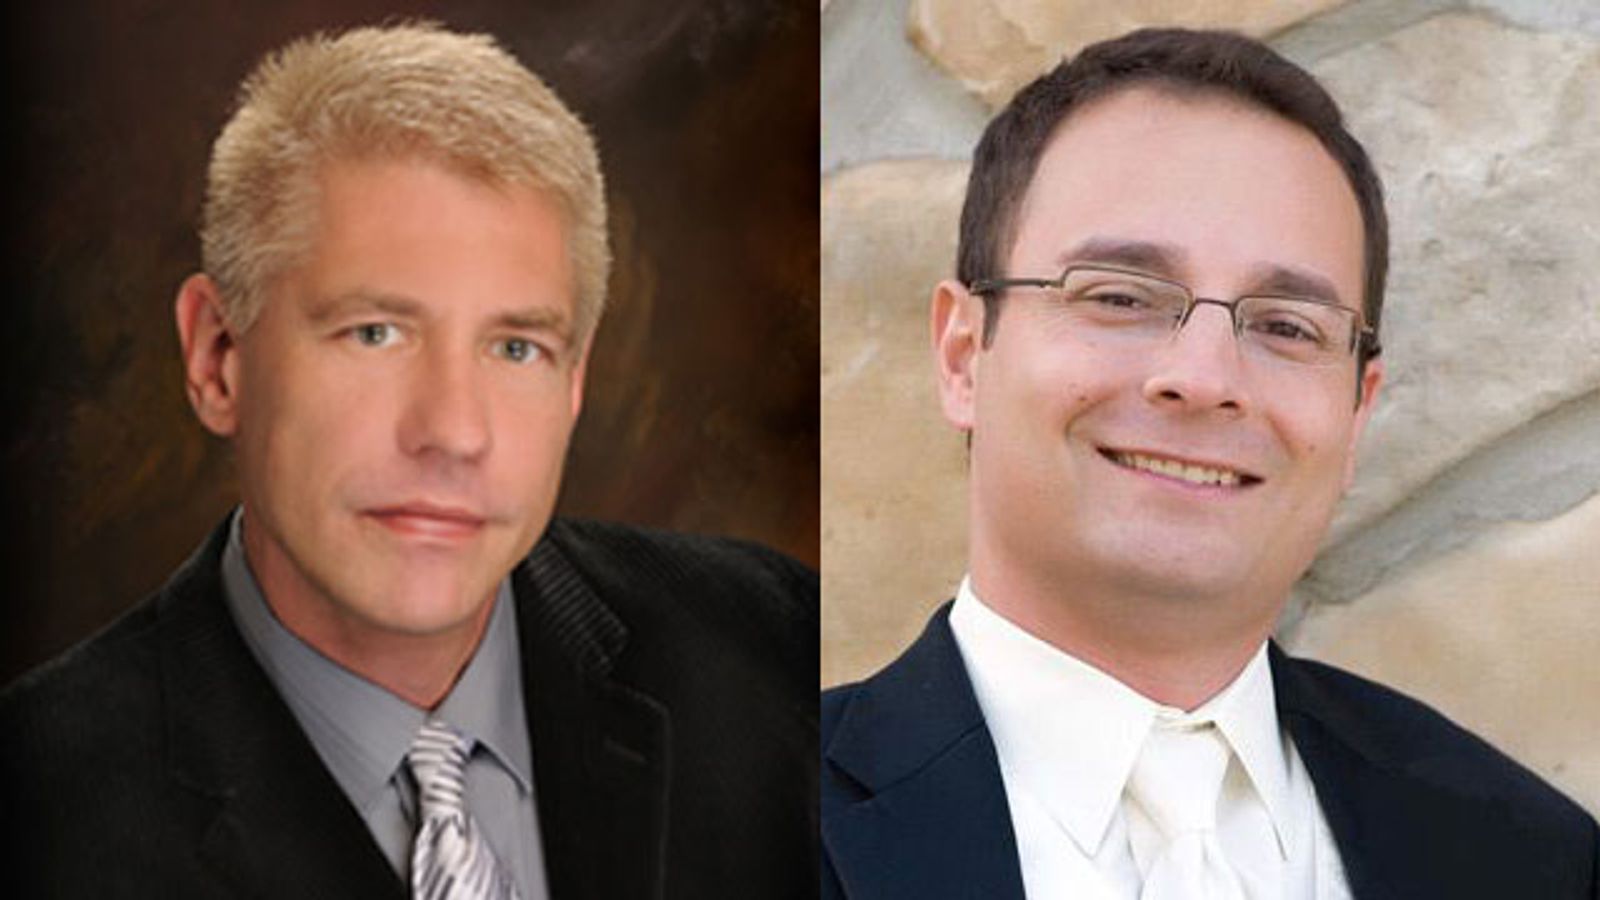 Attorneys Silverstein, Walters Announce 'Of Counsel' Relationship